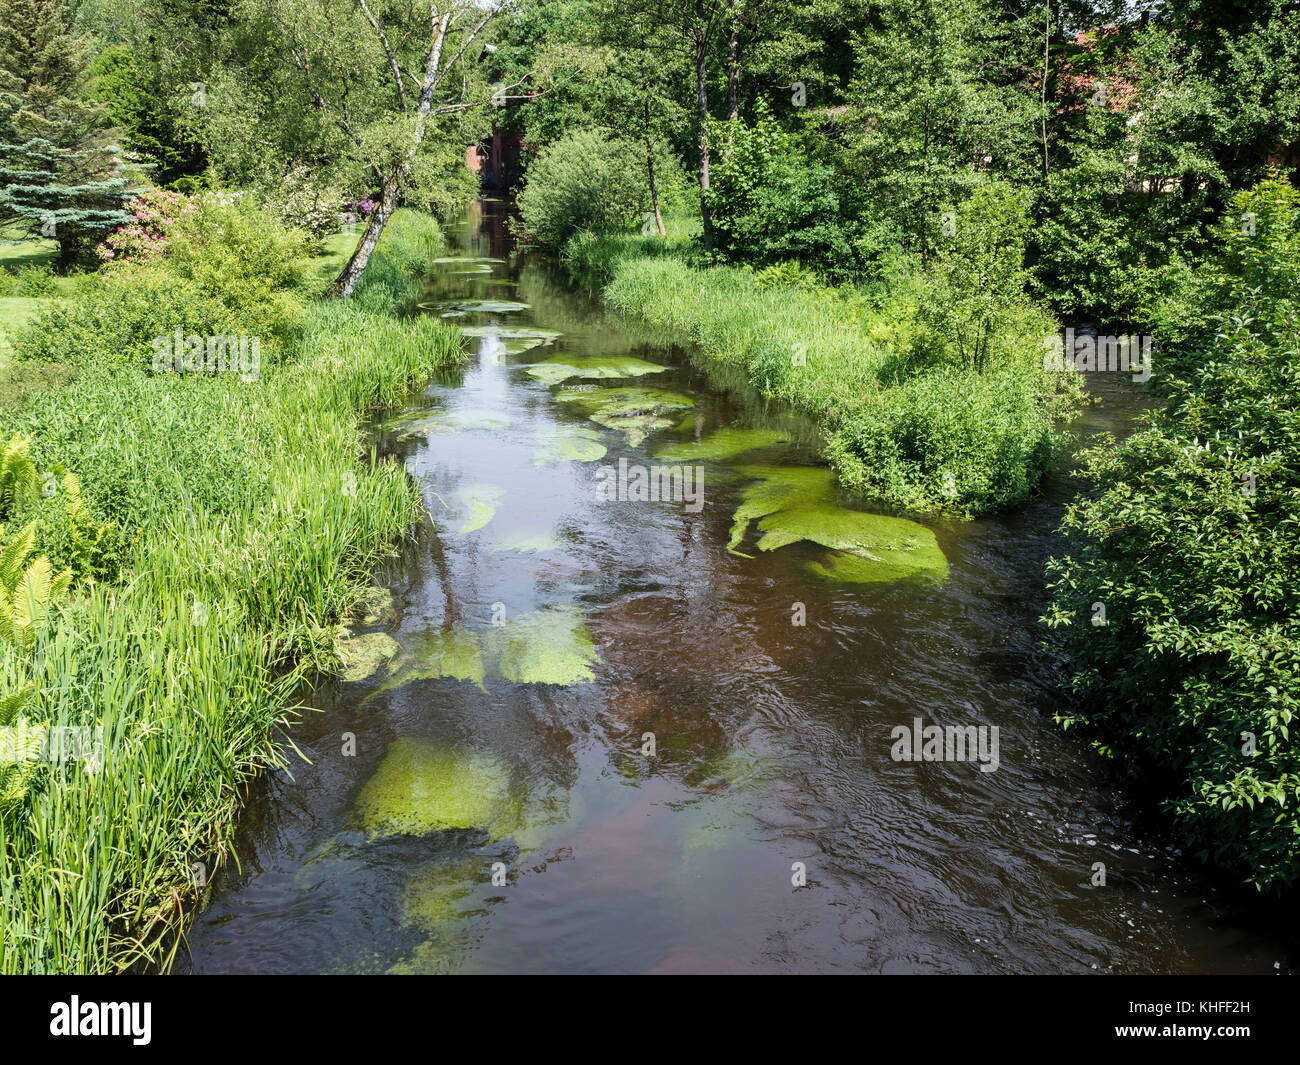 River Oertze, channel from old sawing mill, village Mueden, Germany Stock Photo